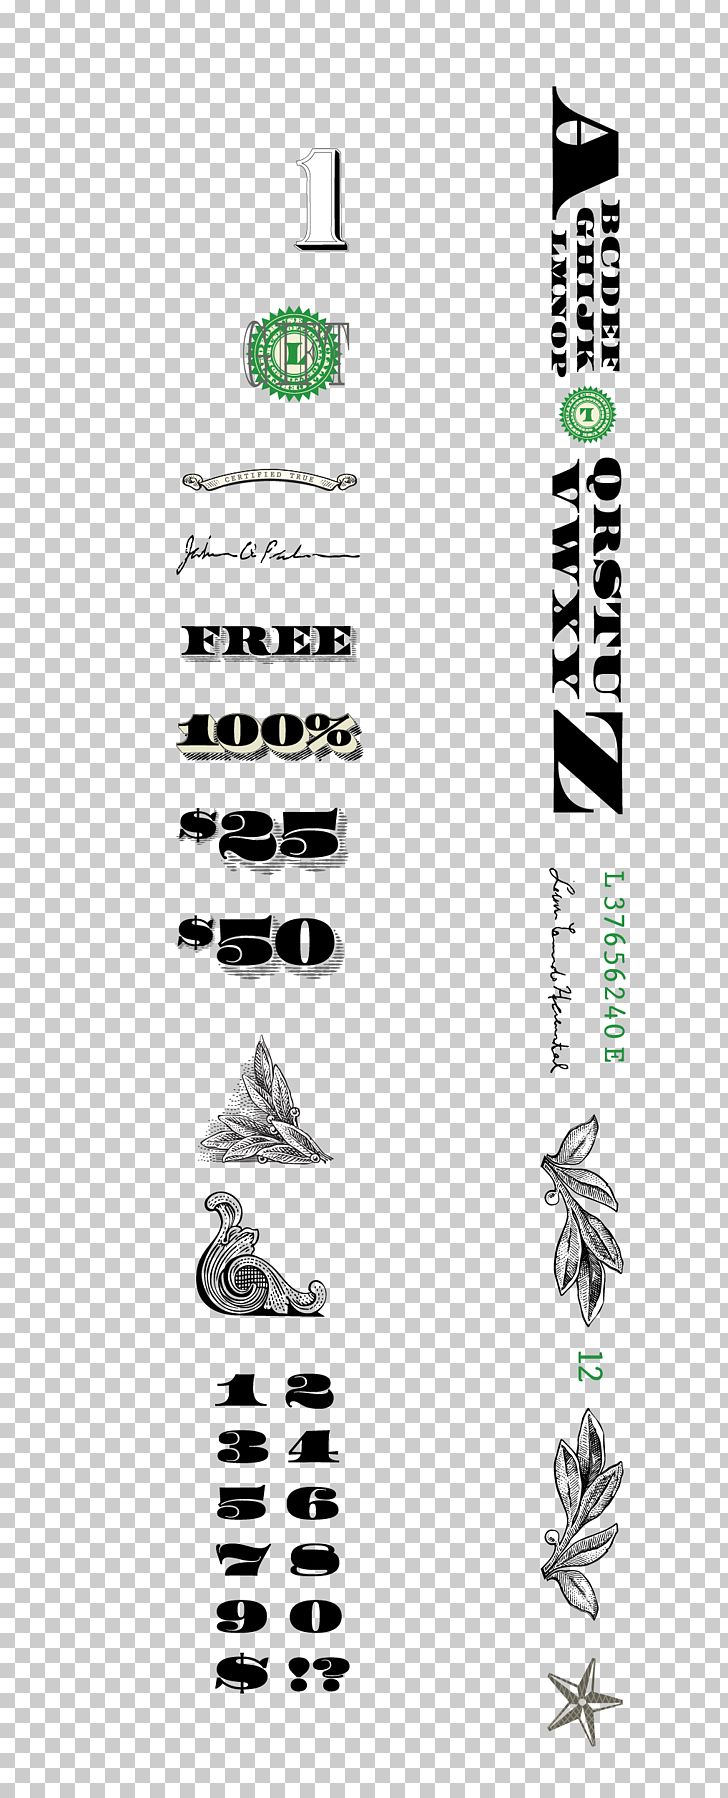 Banknote Graphic Design PNG, Clipart, Banknotes Vector, Bla, Christmas Decoration, Decorative, Elements Vector Free PNG Download